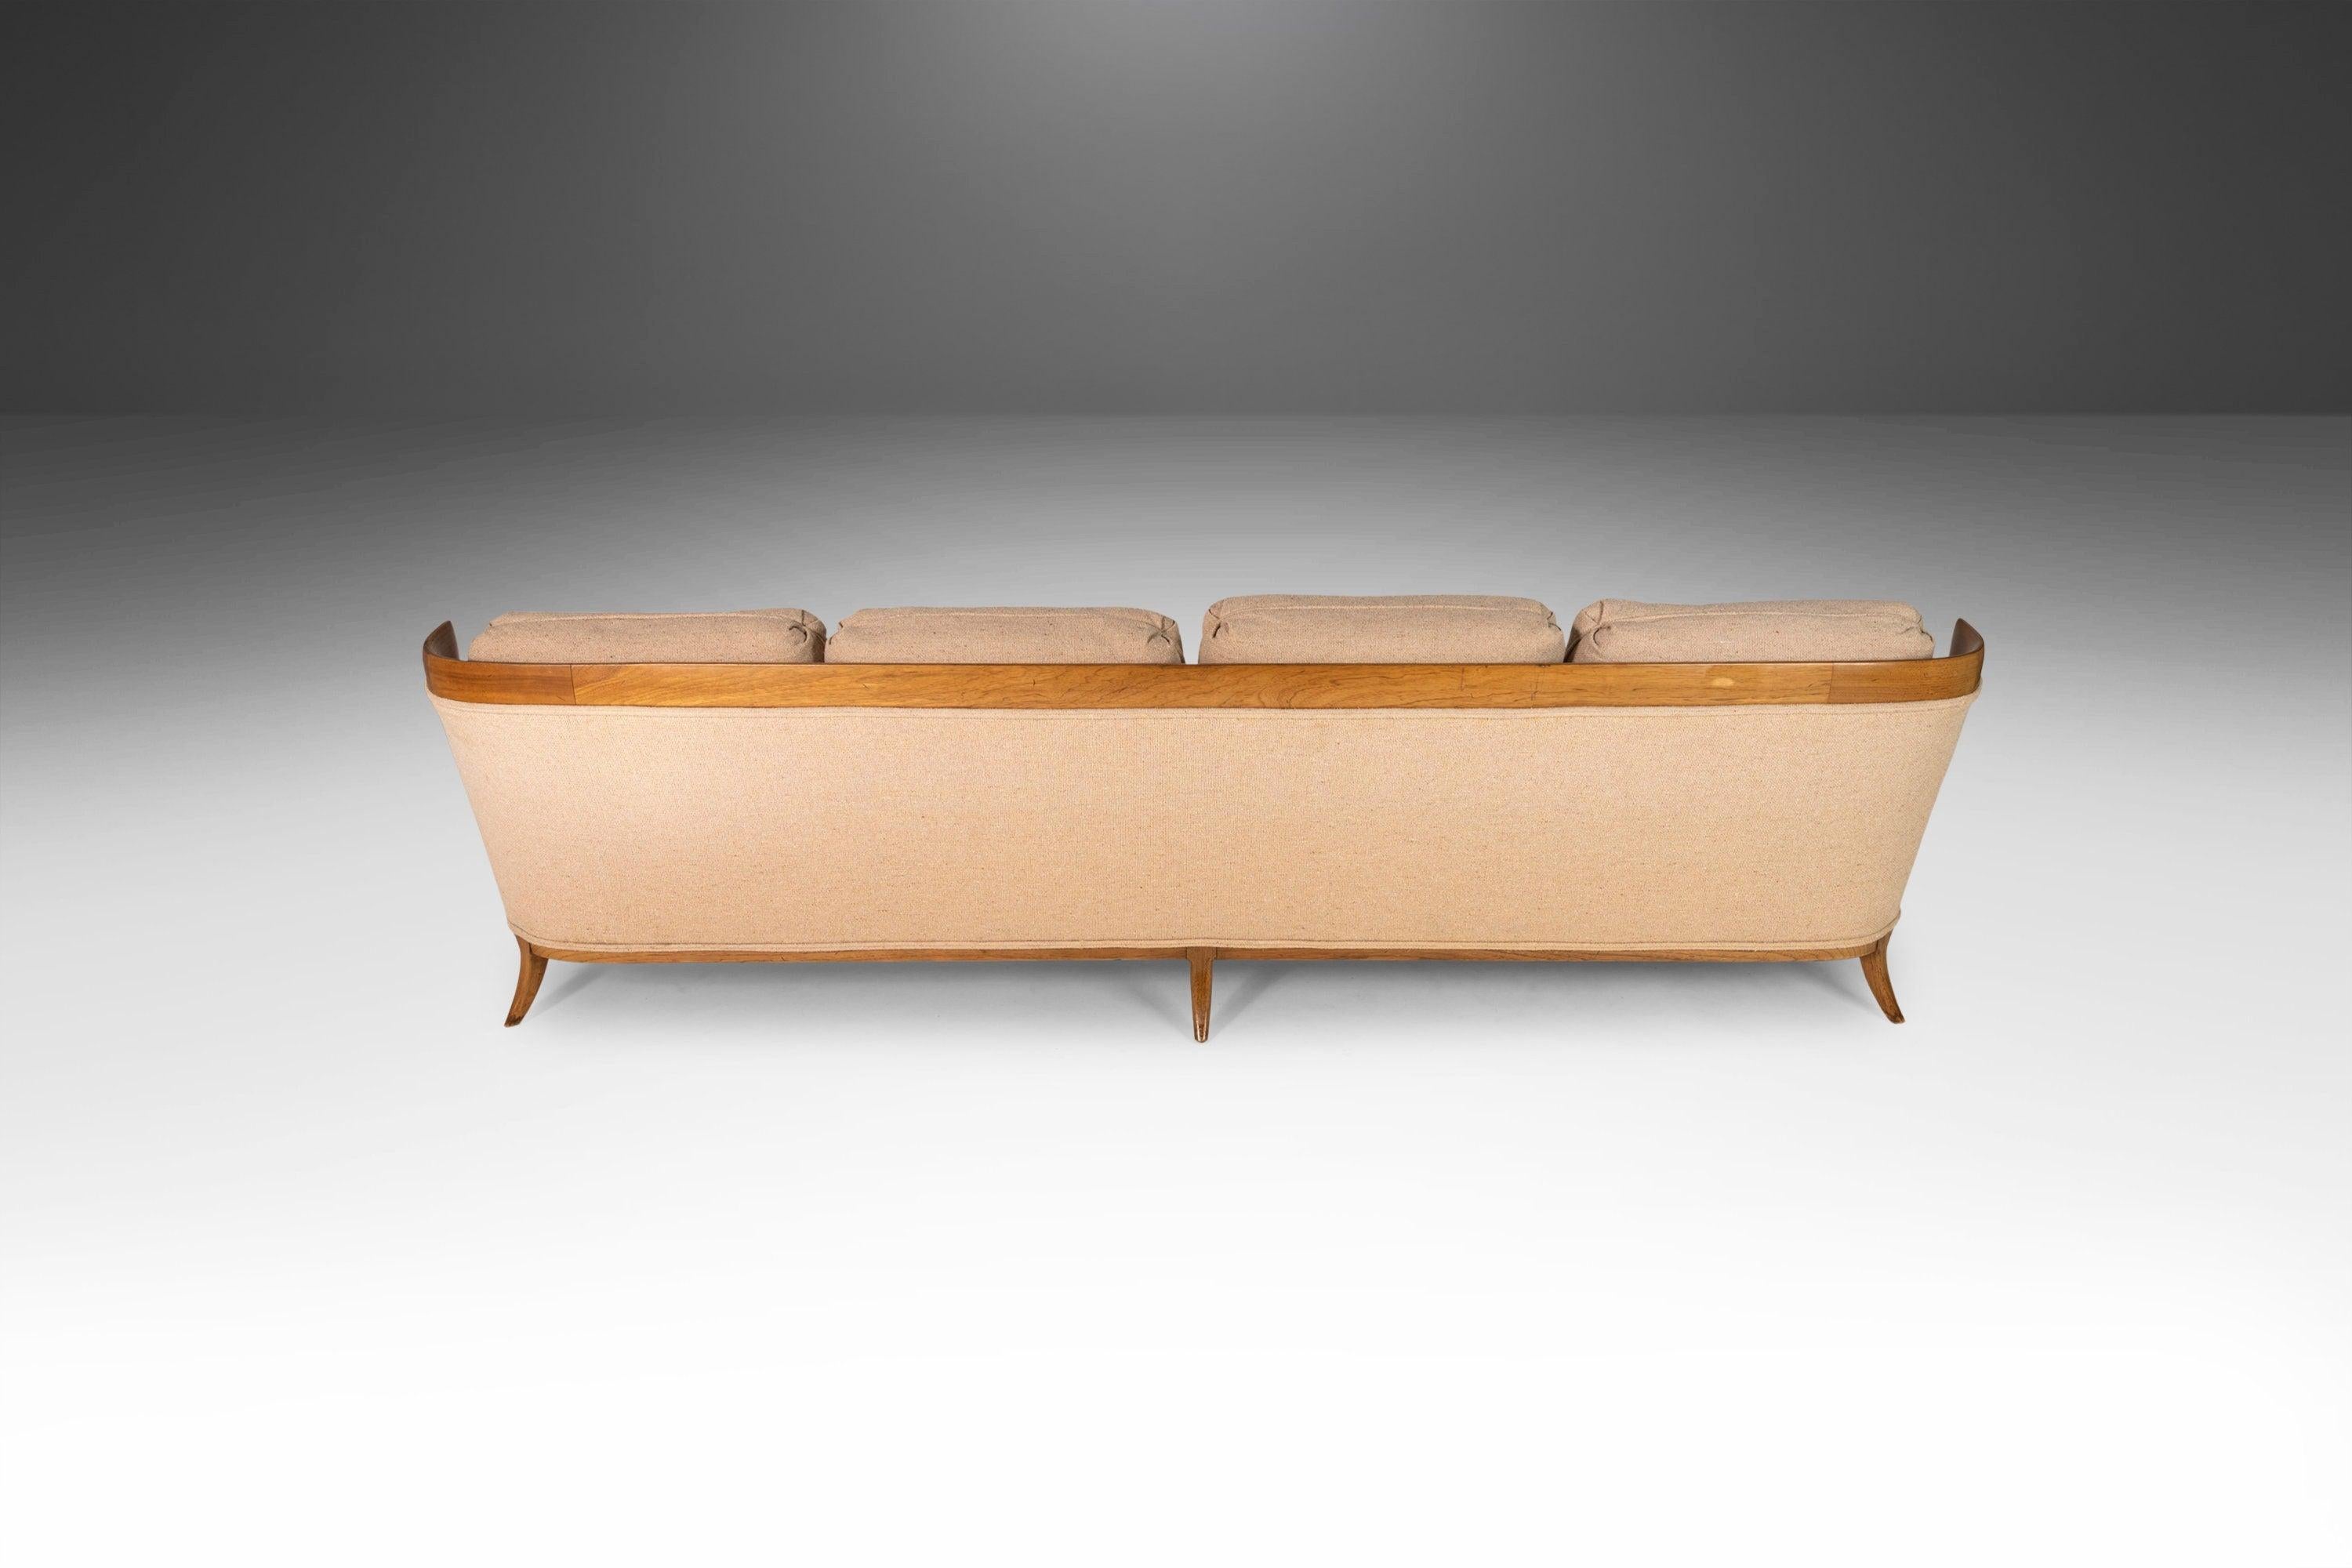 Sculptural Oak Long Four '4' Seat Full Length Sofa by Erwin Lambeth, c. 1960's In Good Condition For Sale In Deland, FL